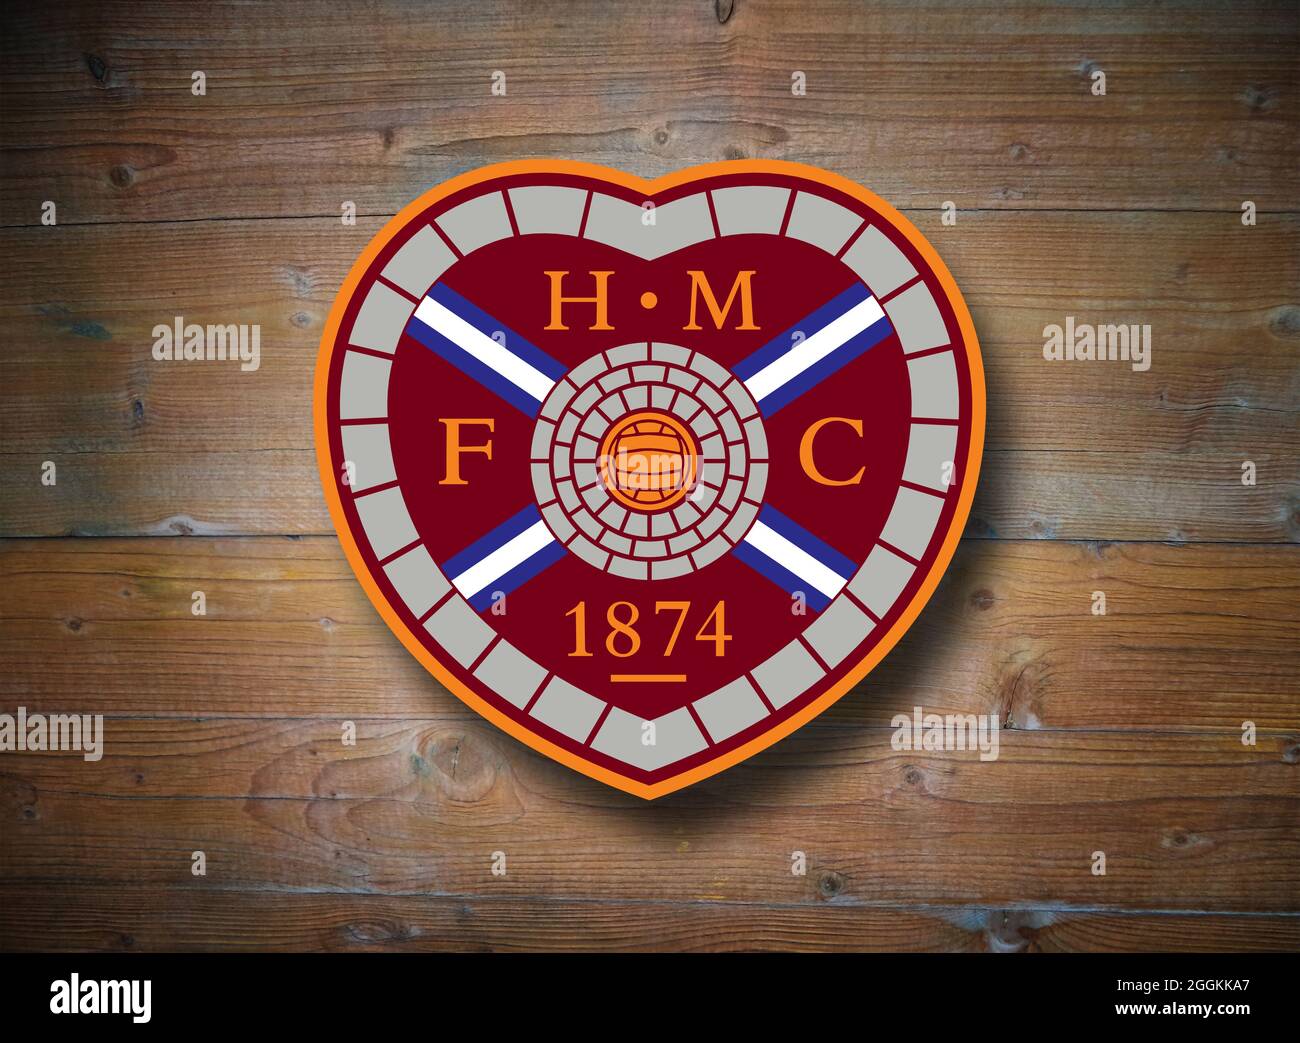 Coat of arms of FC Heart of Midlothian, Edinburgh, football club from Scotland, wooden background Stock Photo